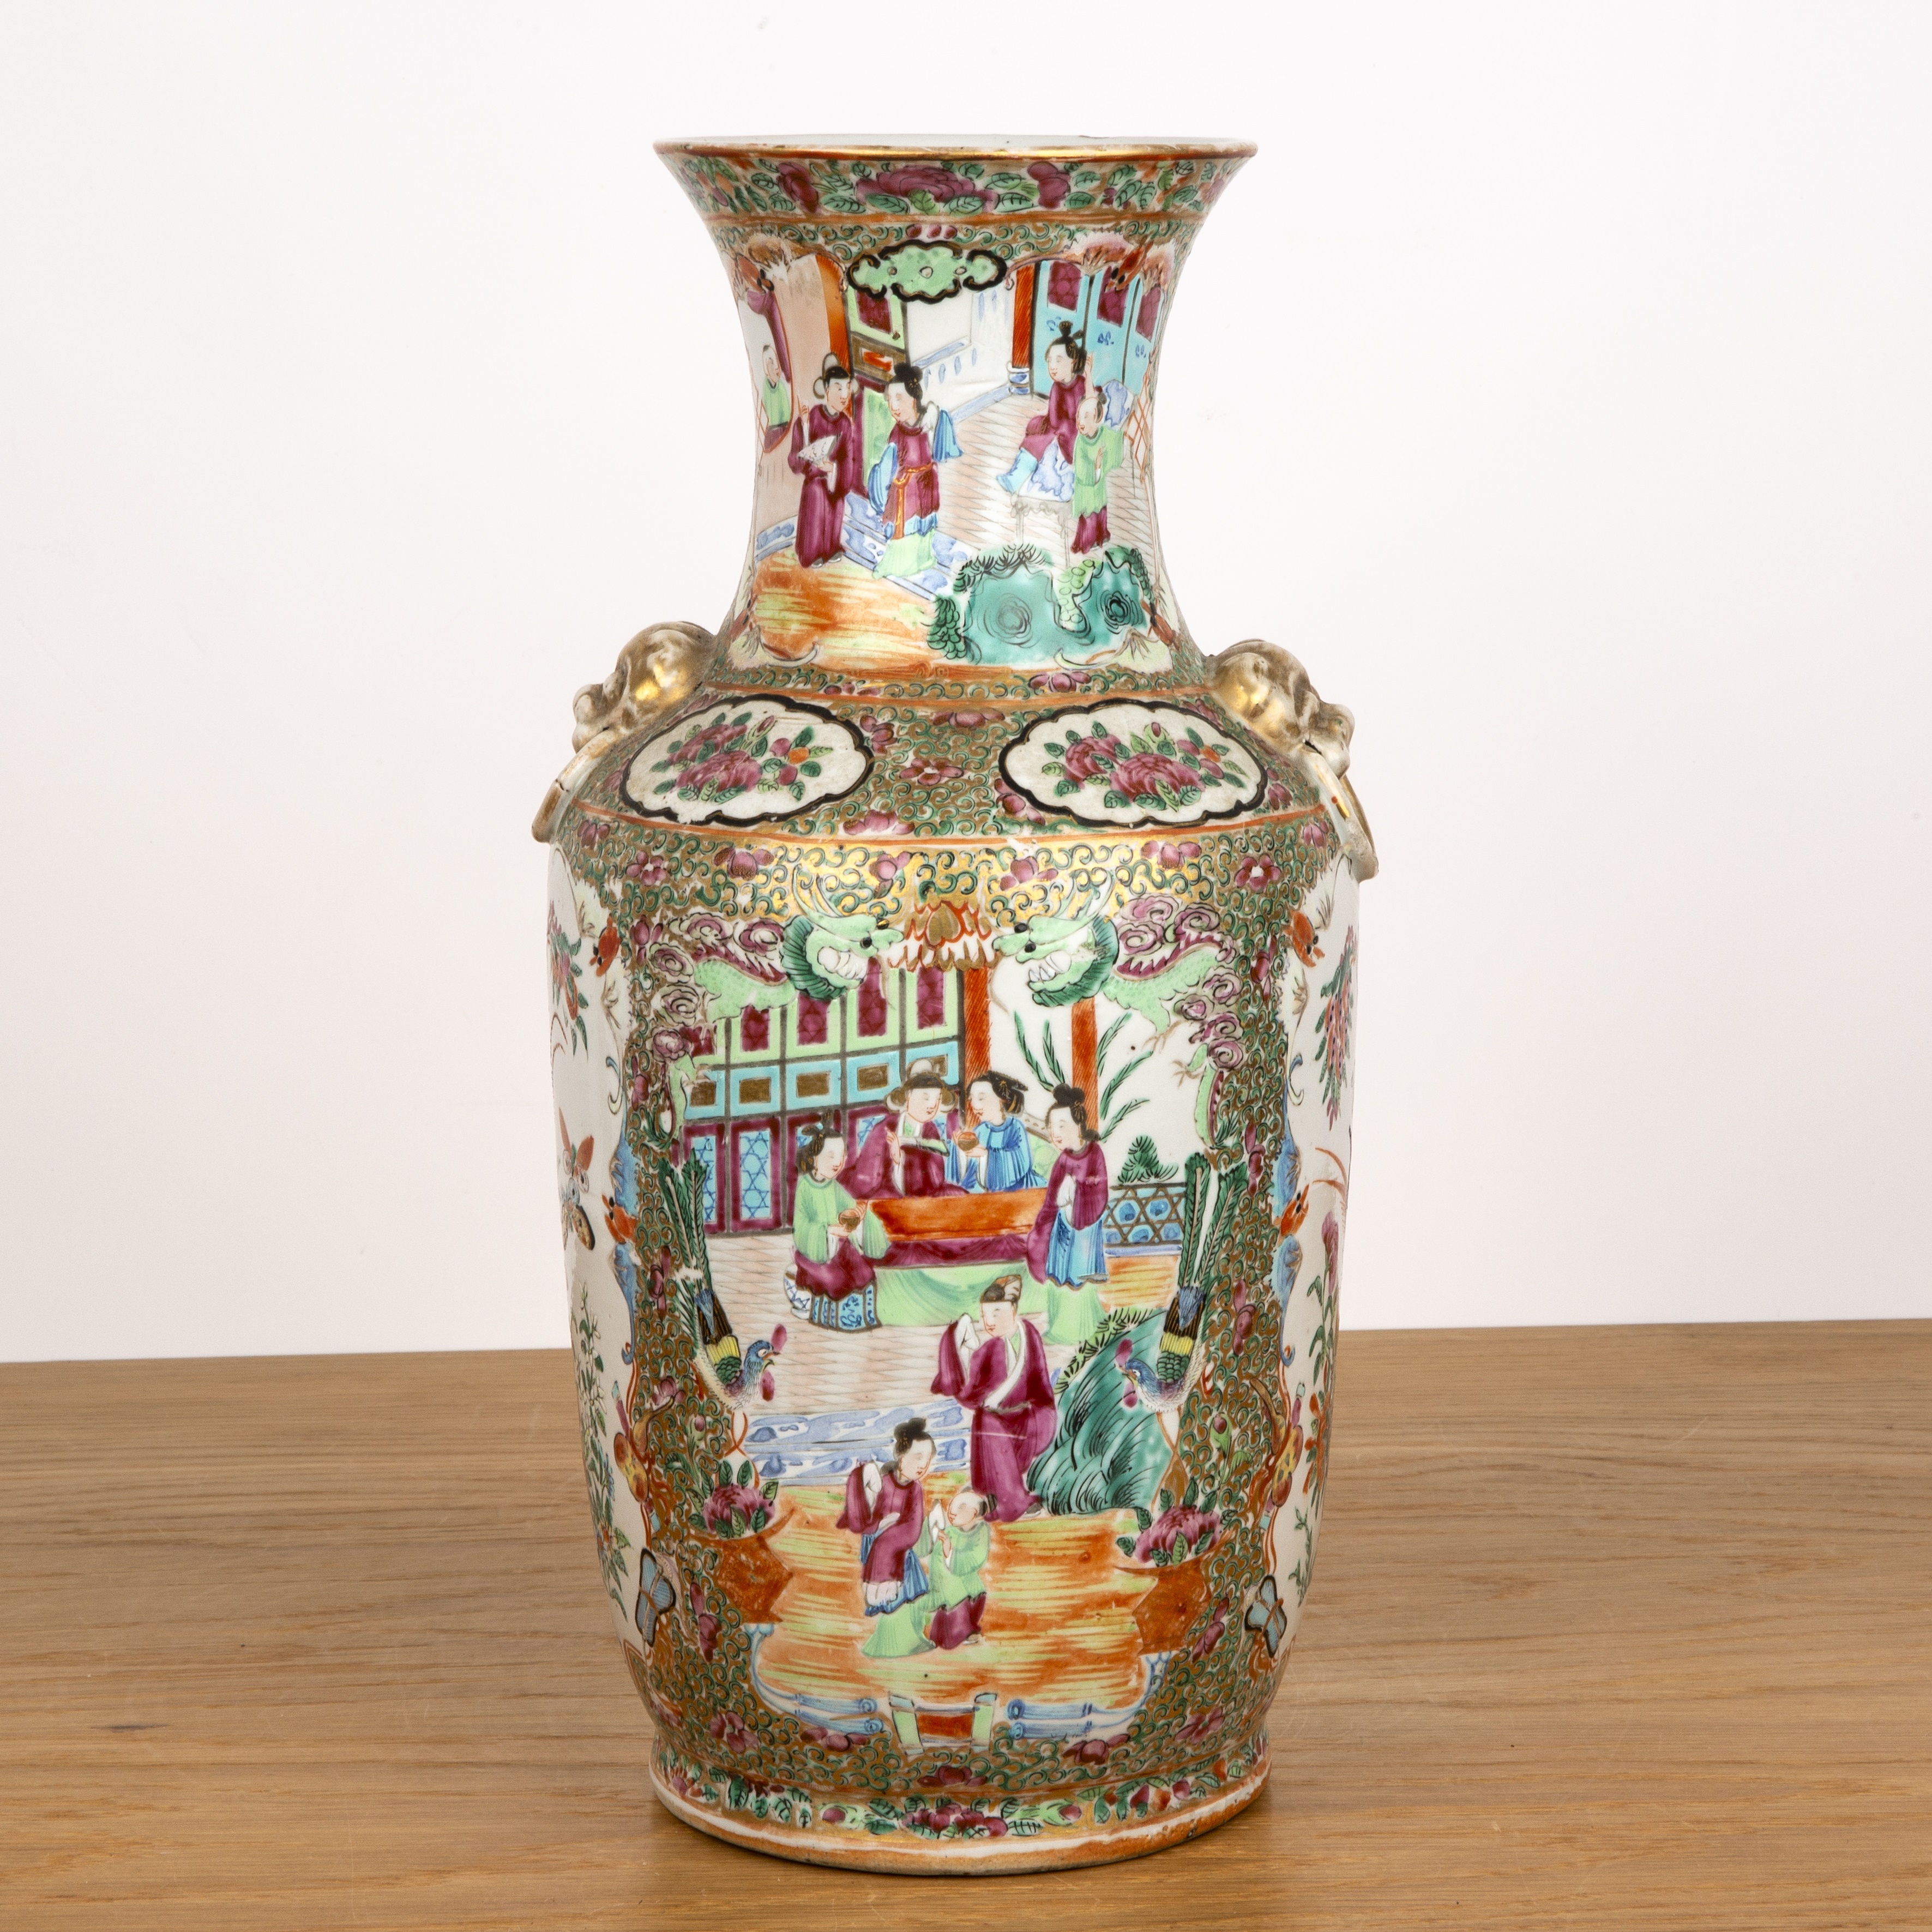 Canton porcelain vase Chinese, 19th Century painted with panels of interspersed birds, butterflies